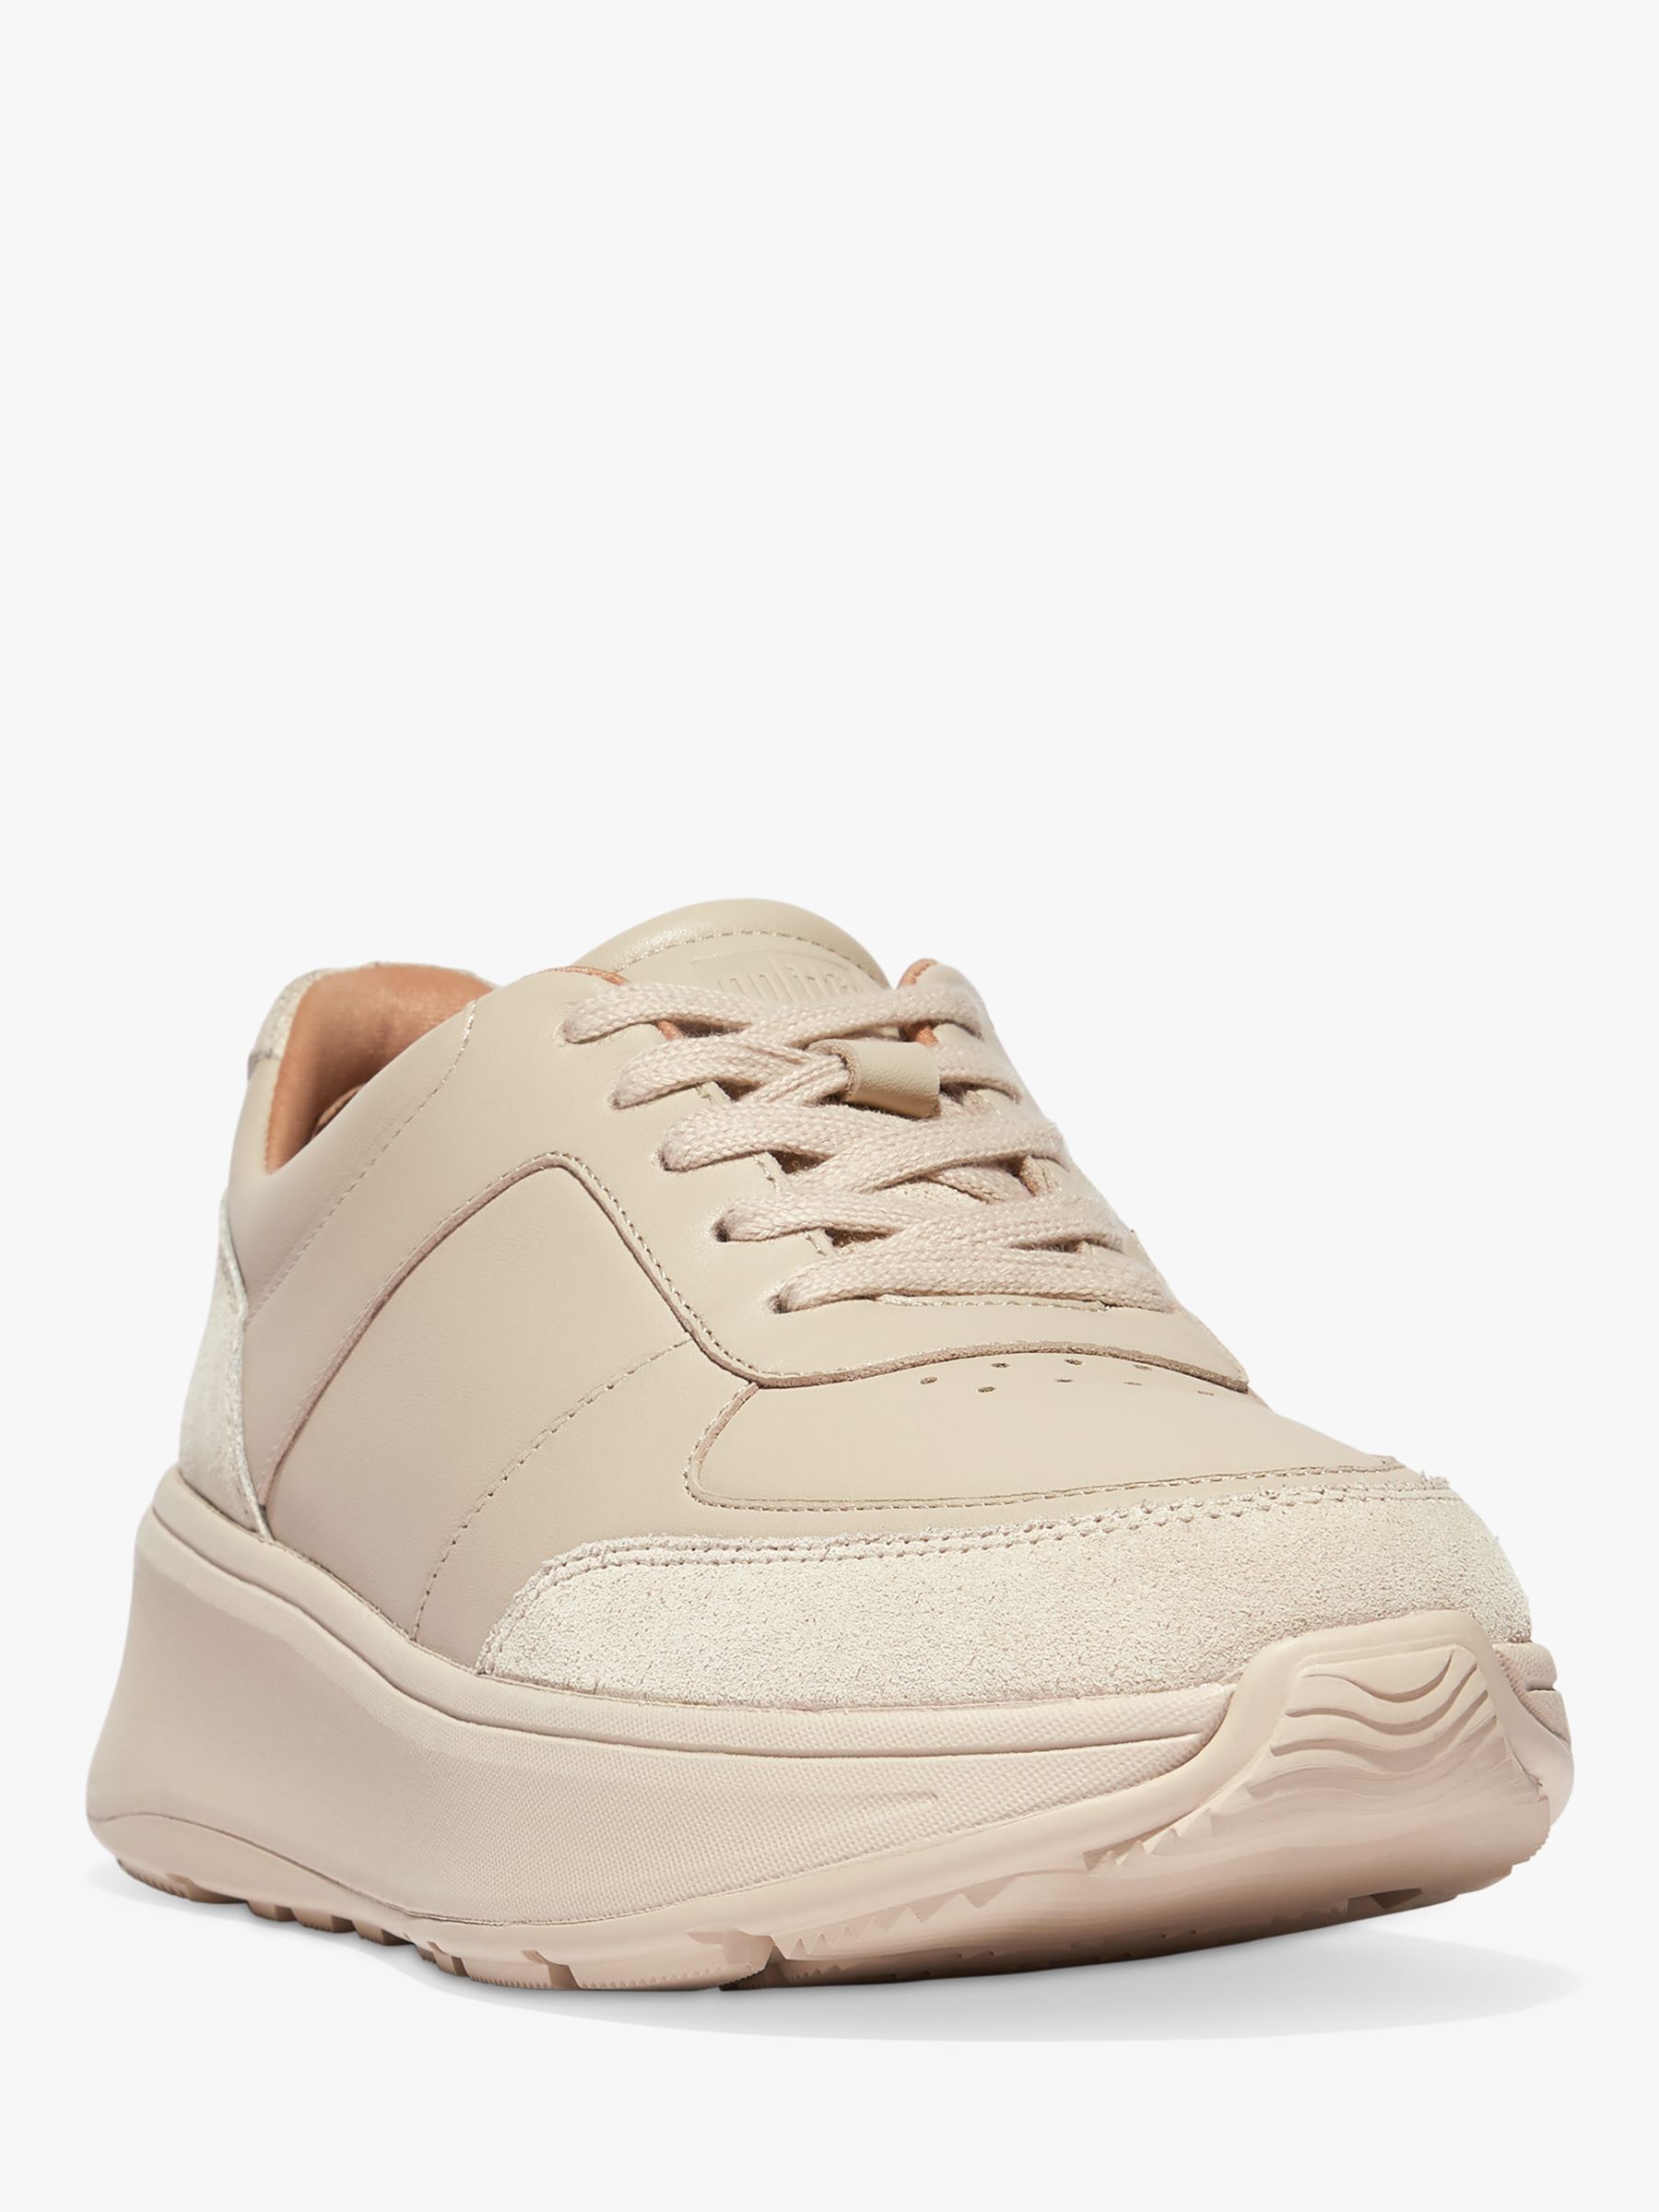 FitFlop Fmode Leather Chunky Trainers, Stone Beige at John Lewis & Partners